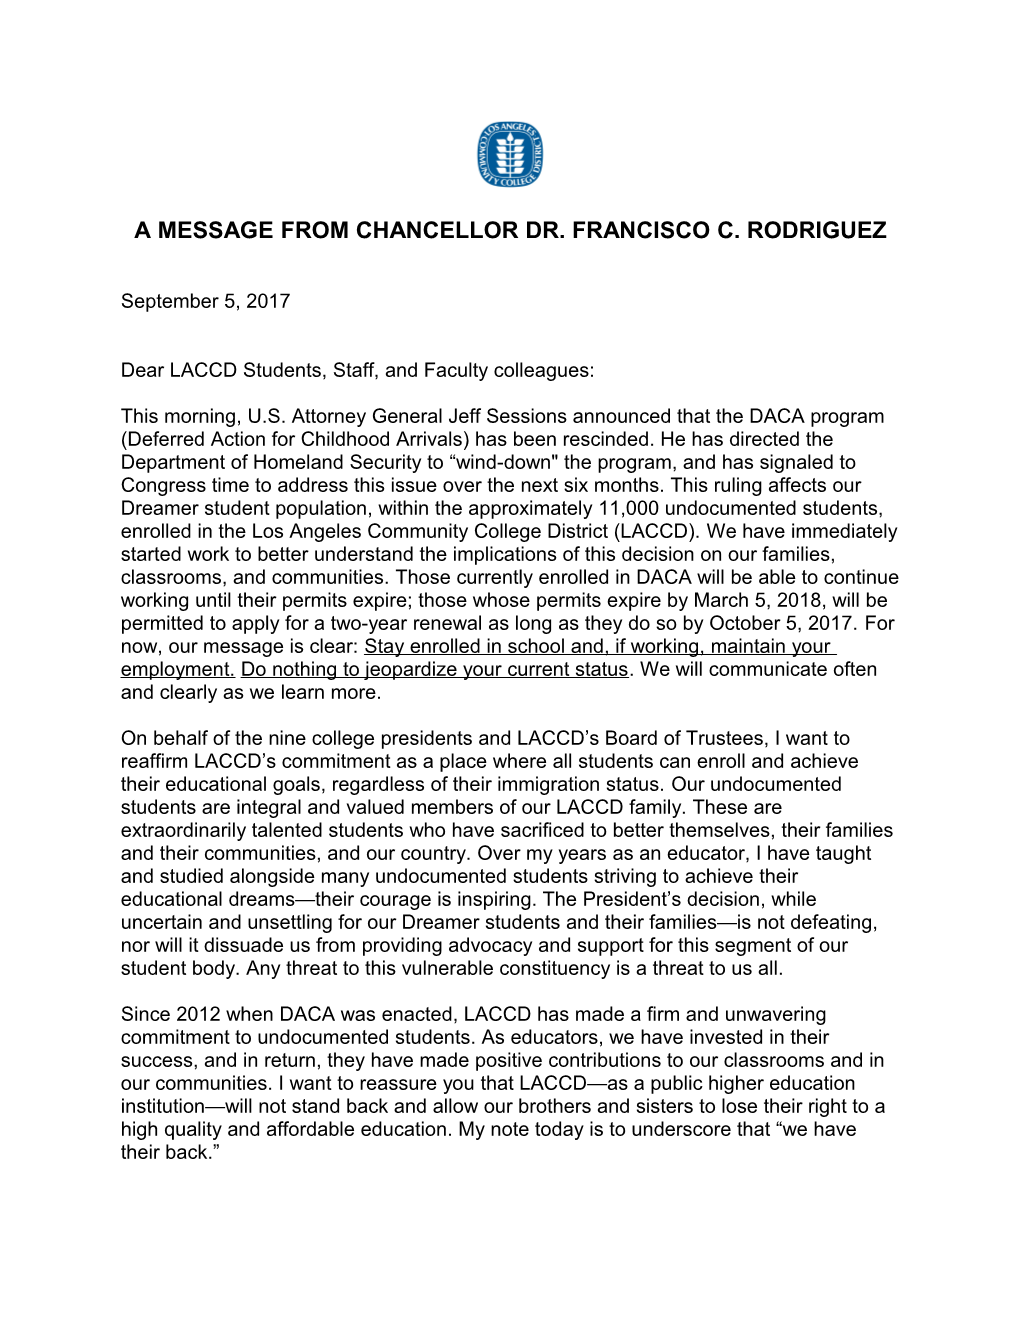 A Message from Chancellor Dr. Francisco C. Rodriguez